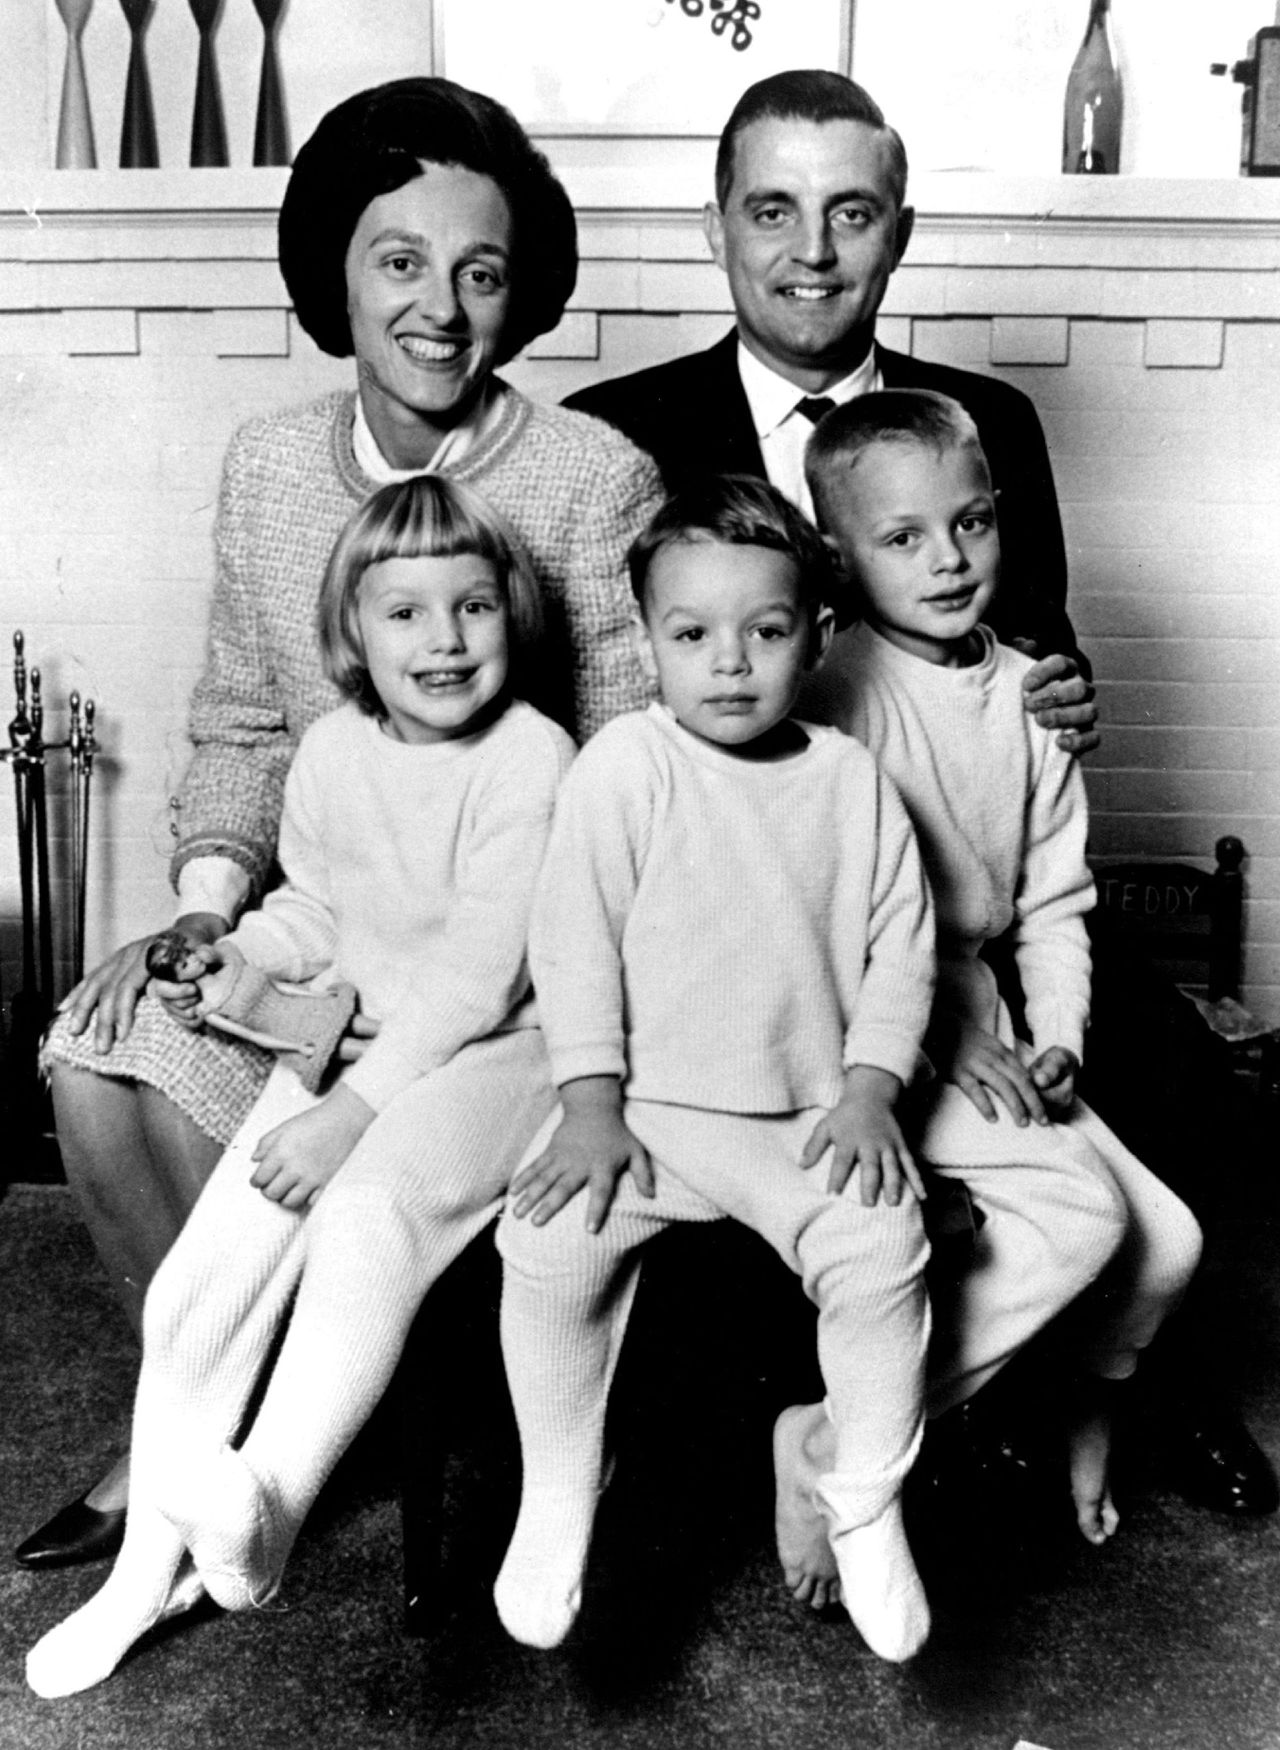 Joan and Walter Mondale pose for a family photo with their kids Eleanor, William and Ted, in Minneapolis on October 21, 1964.